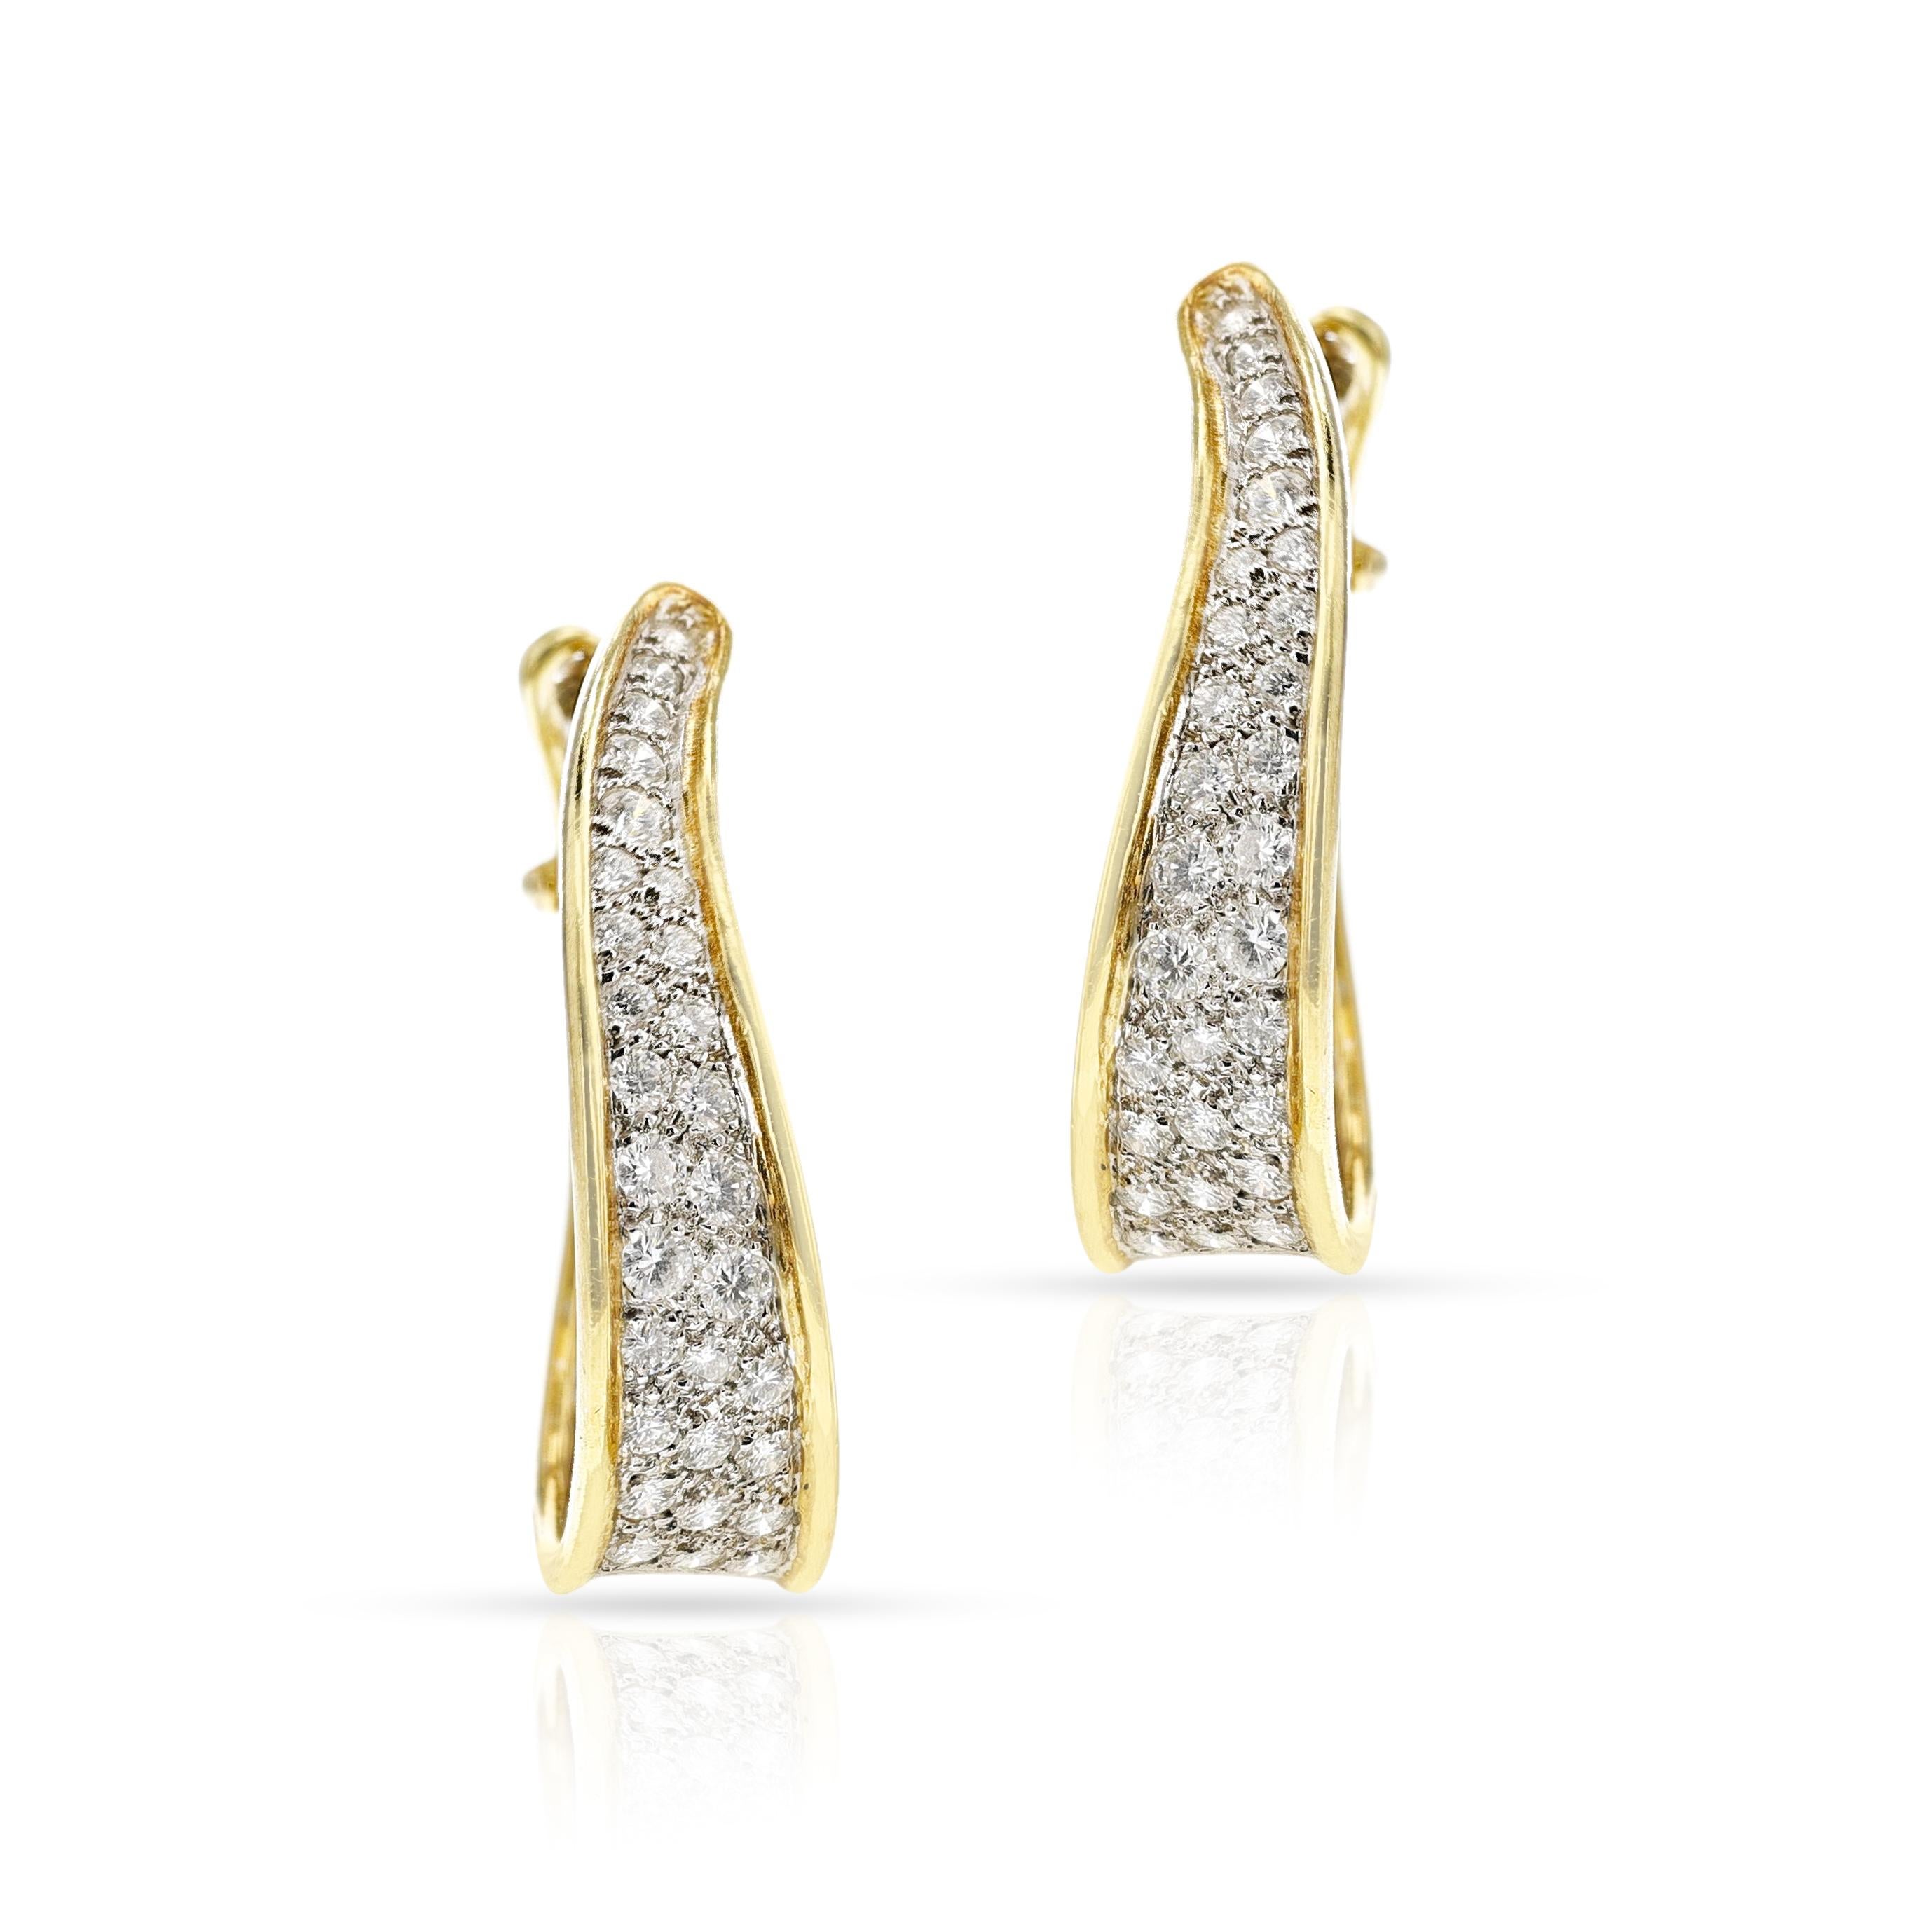 A pair of Curved Diamond Hoops made in 18k bi-color gold- yellow and white. The diamonds weigh appx. 3.80 carats total. The measurements of the hoops are 1 3/8 x 1/4 inches.
Total Weight: 15.4 grams